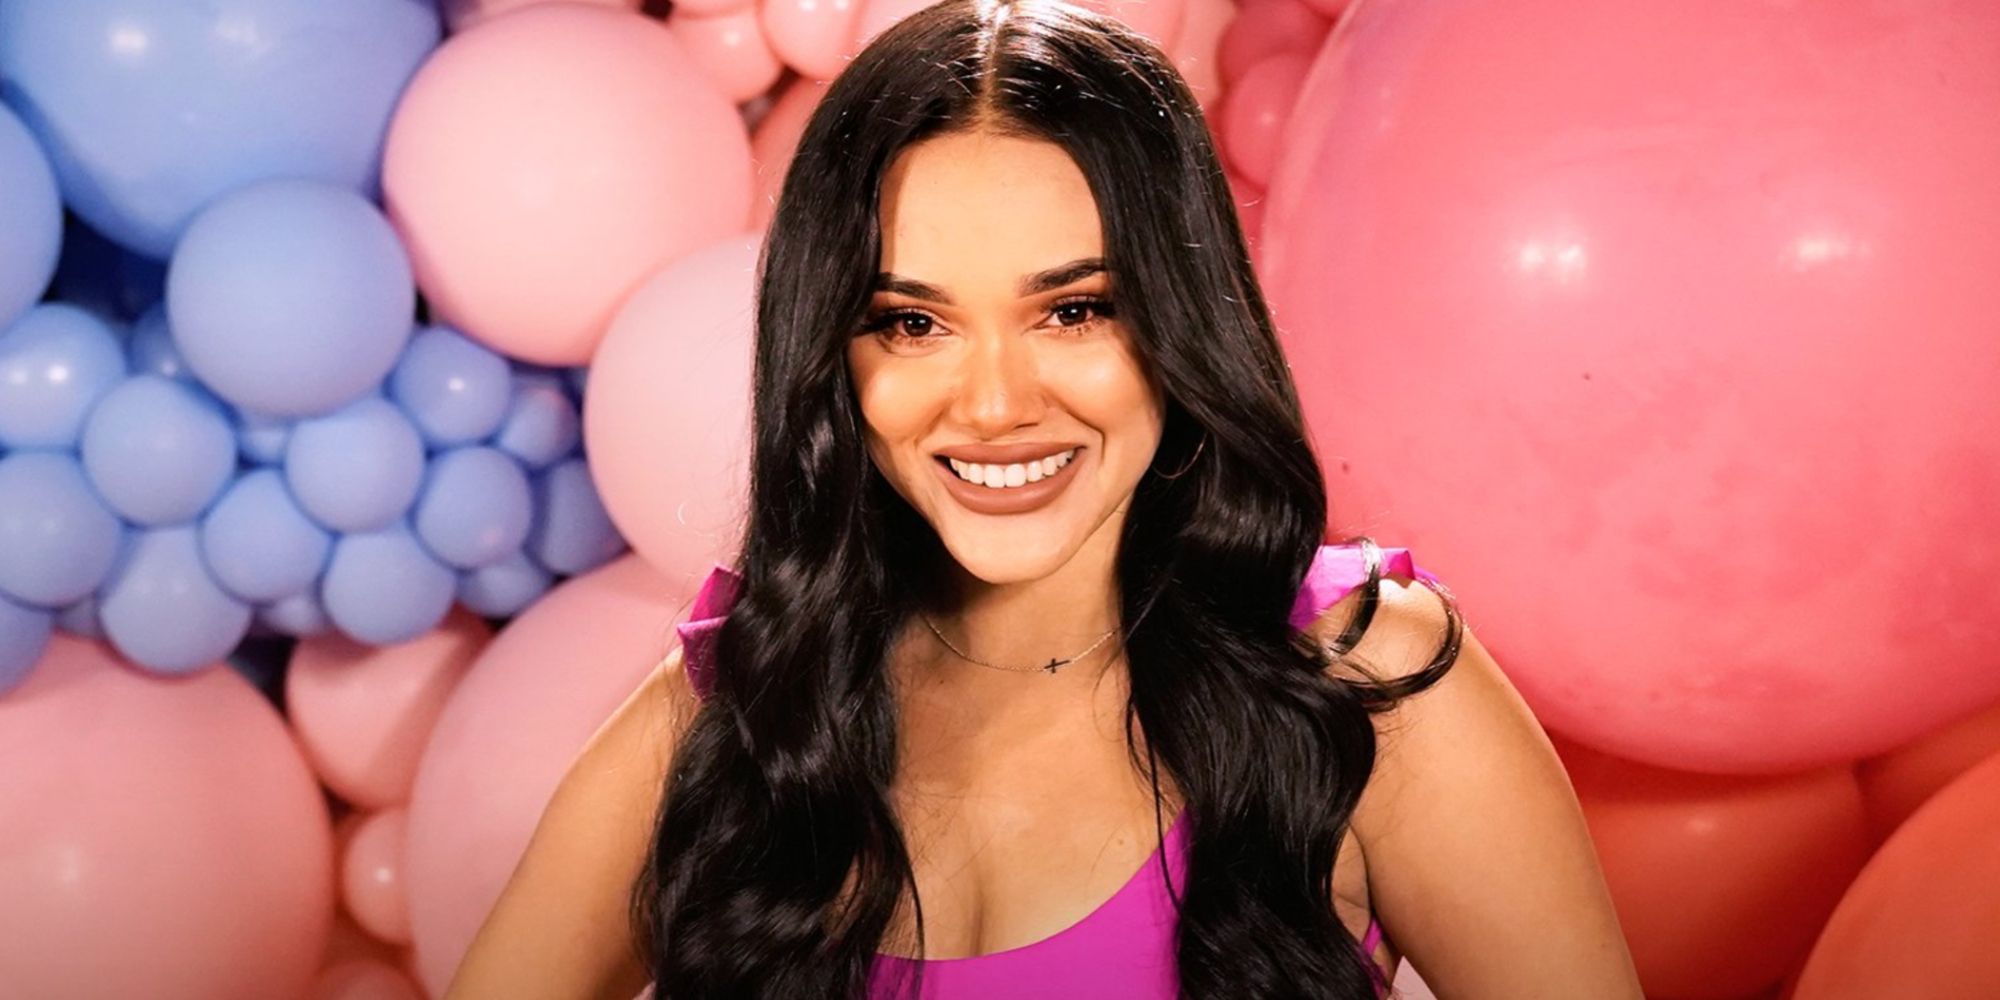 Love Island USA: Cely’s Turtle Video Blows Up On TikTok With 47M Views